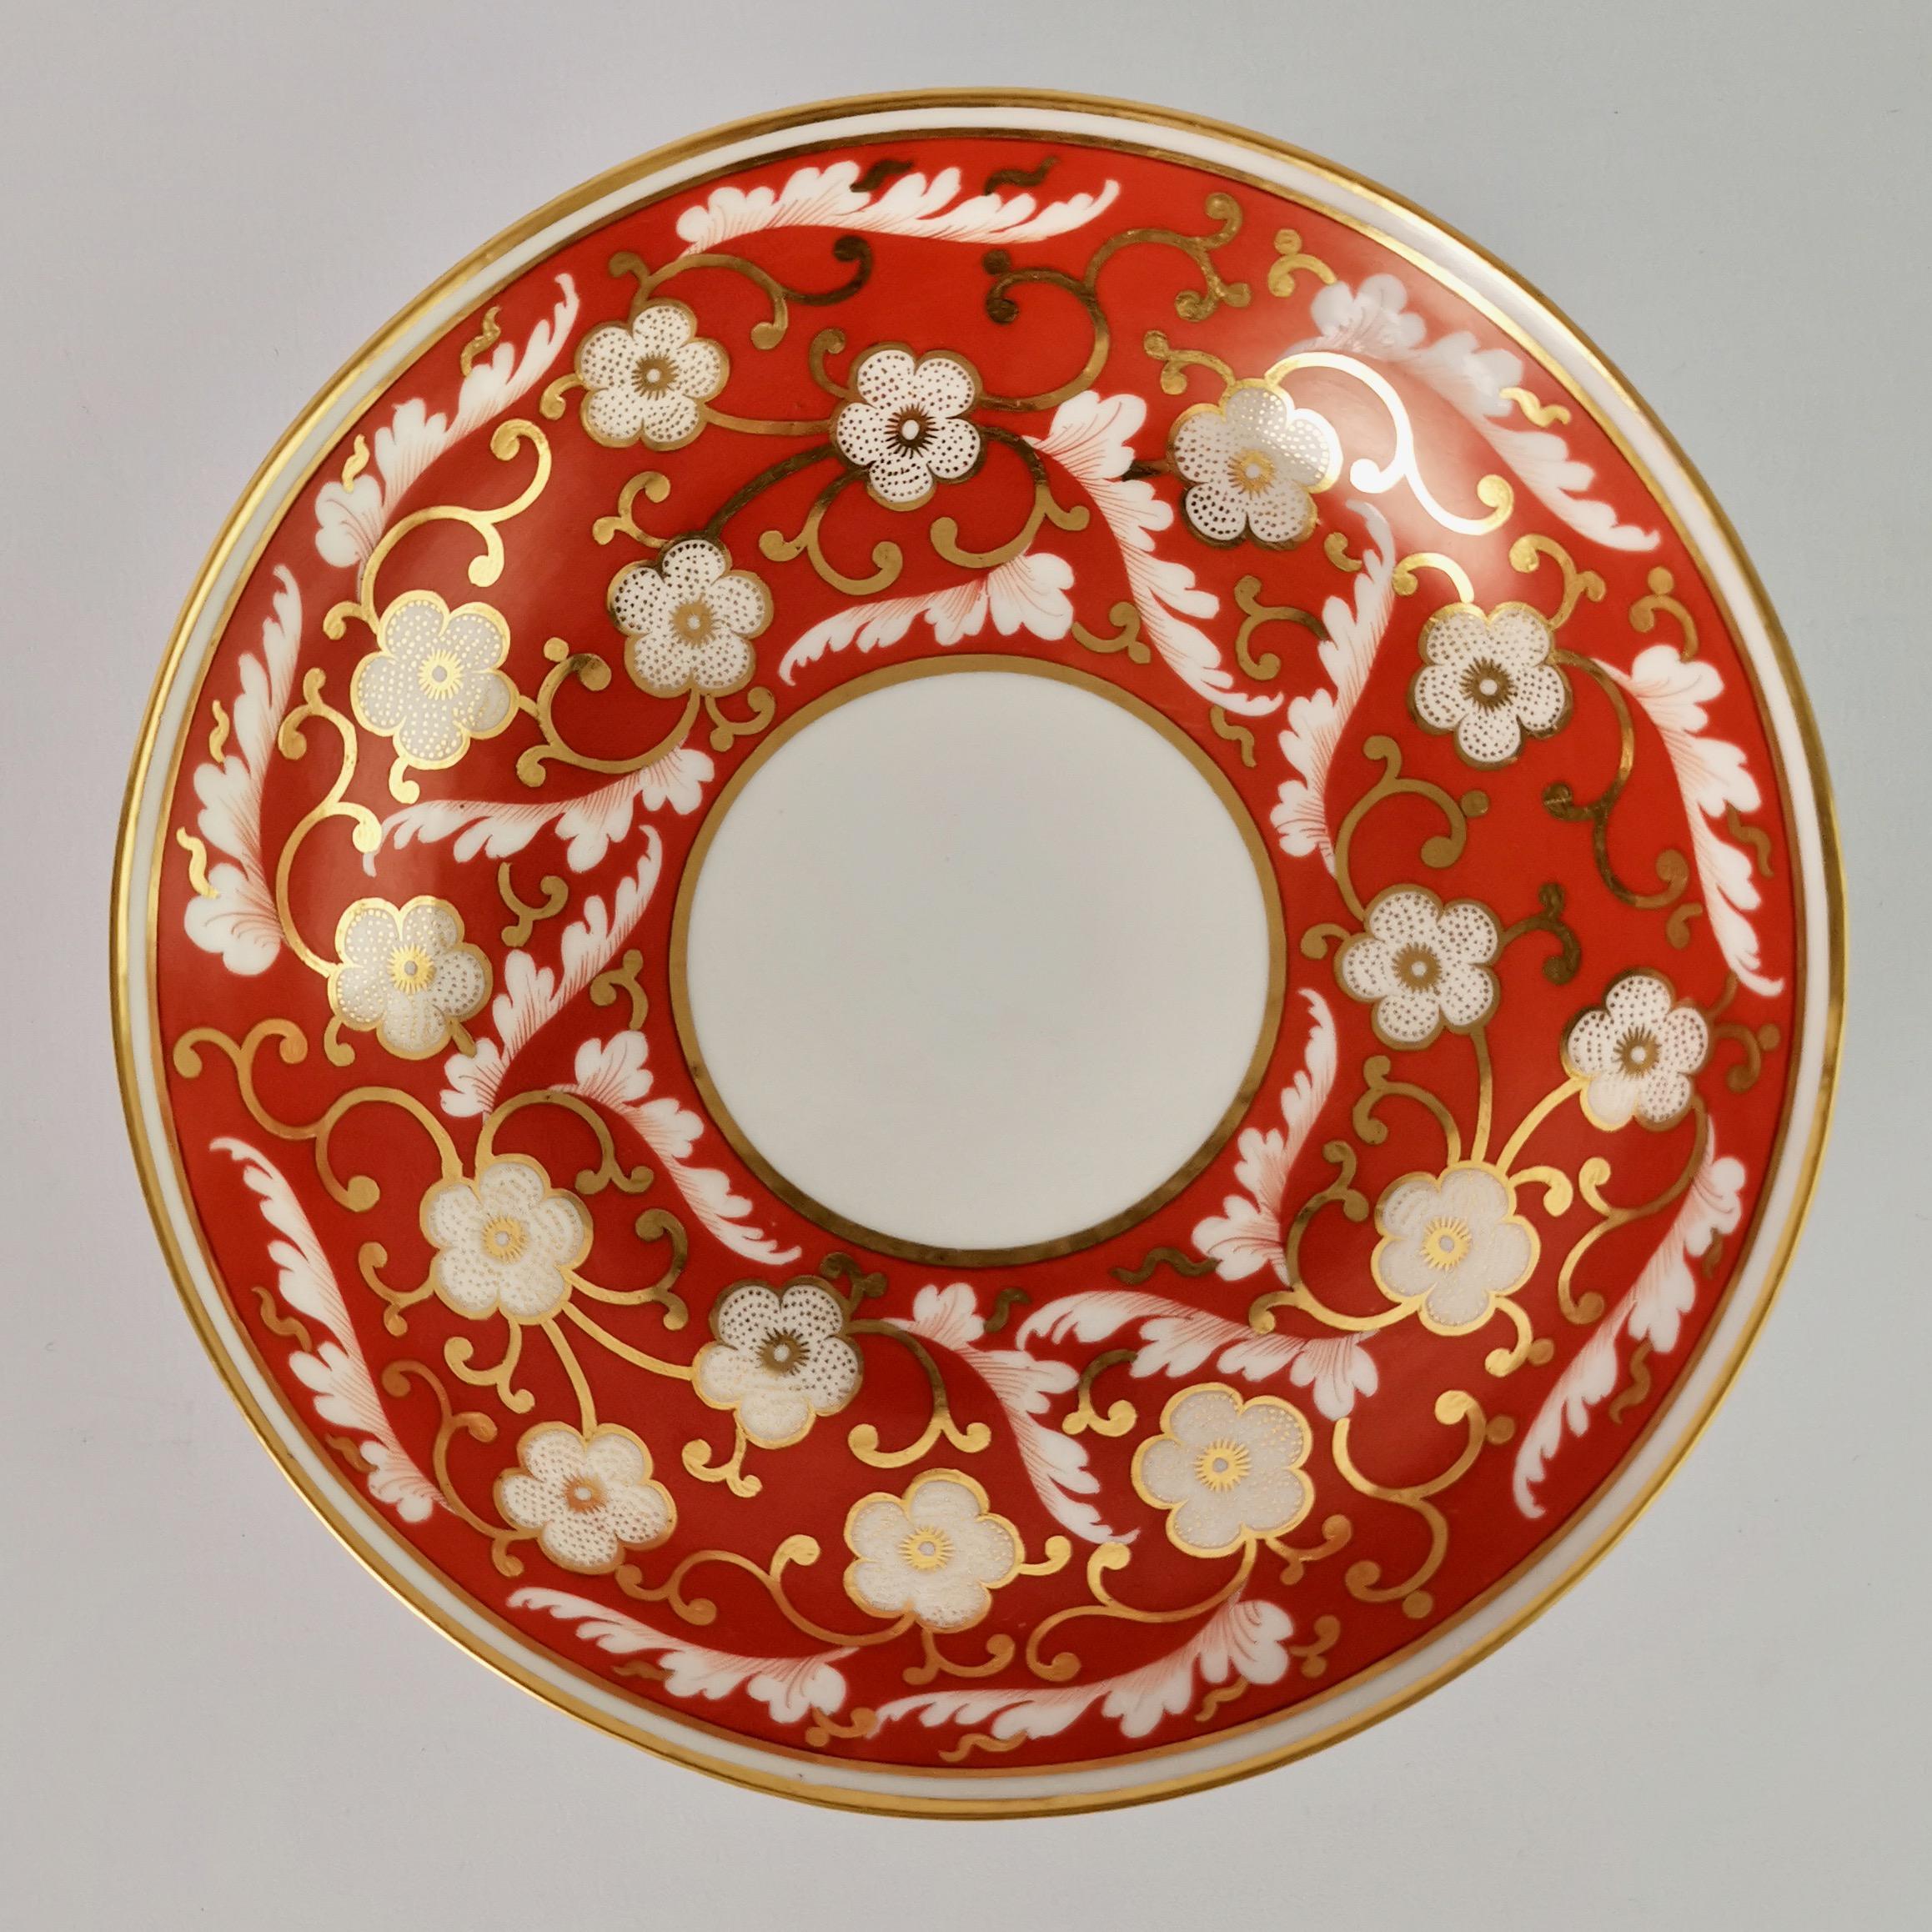 English Chamberlains Worcester Tiny Tea Service for Two, Orange Floral, Regency ca 1805